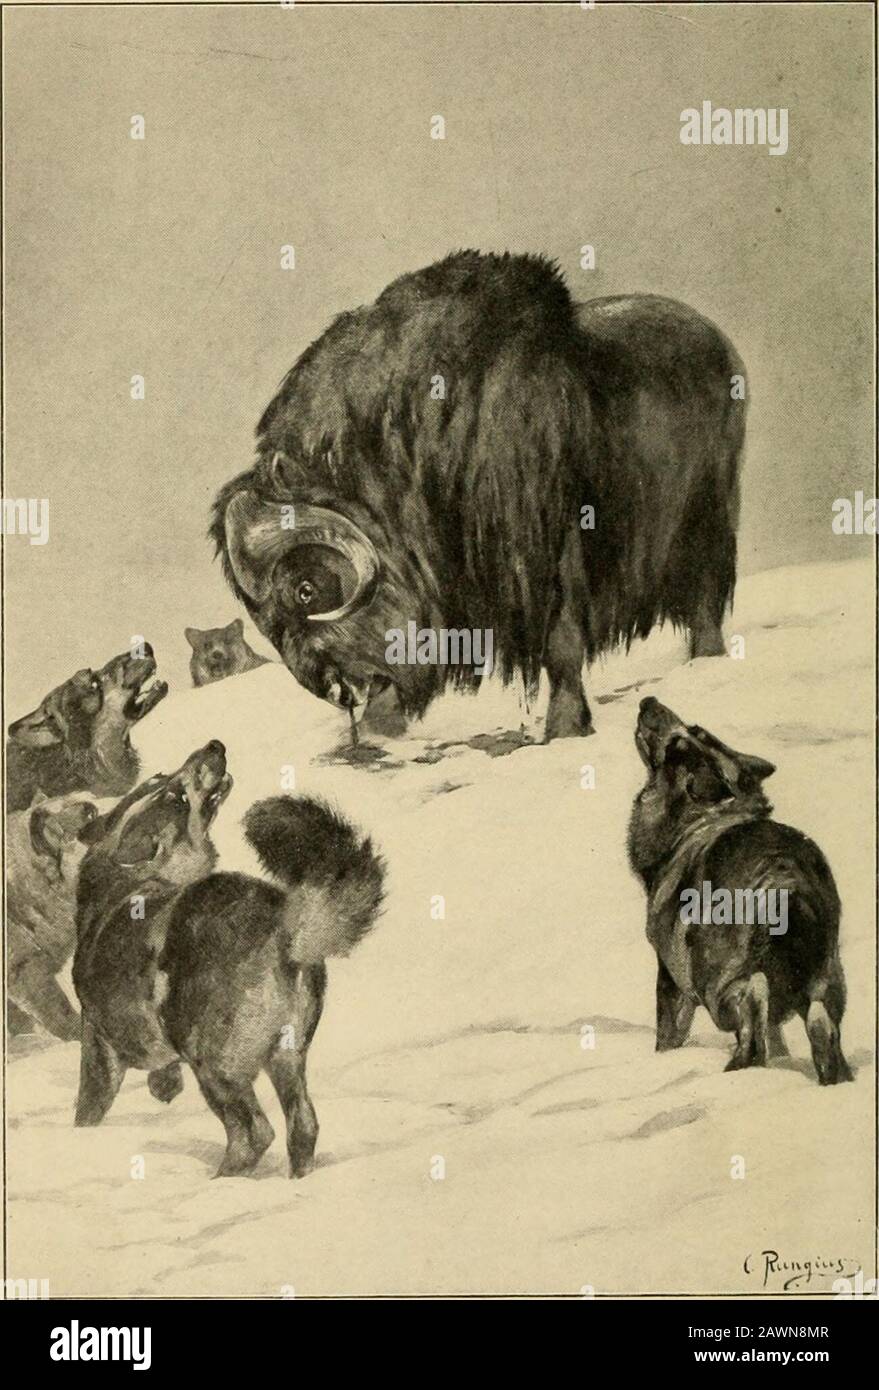 Musk-ox, bison, sheep, and goat . mightget wind of the other two of the four after whichI had originally started, or find tracks of strag-glers from the main herd. Several miles I wenton, but finding no tracks, and darkness comingdown, I turned to make my way back, knowingthat the Indians would follow up and camp bythe slain musk-oxen for the night. But as Ijourneyed I suddenly realized that, except forgoing in a southerly direction, I really had nodefinite idea of the exact direction in which Iwas travelling, and with night setting in and achilling wind blowing I knew that to lose my-self mig Stock Photo